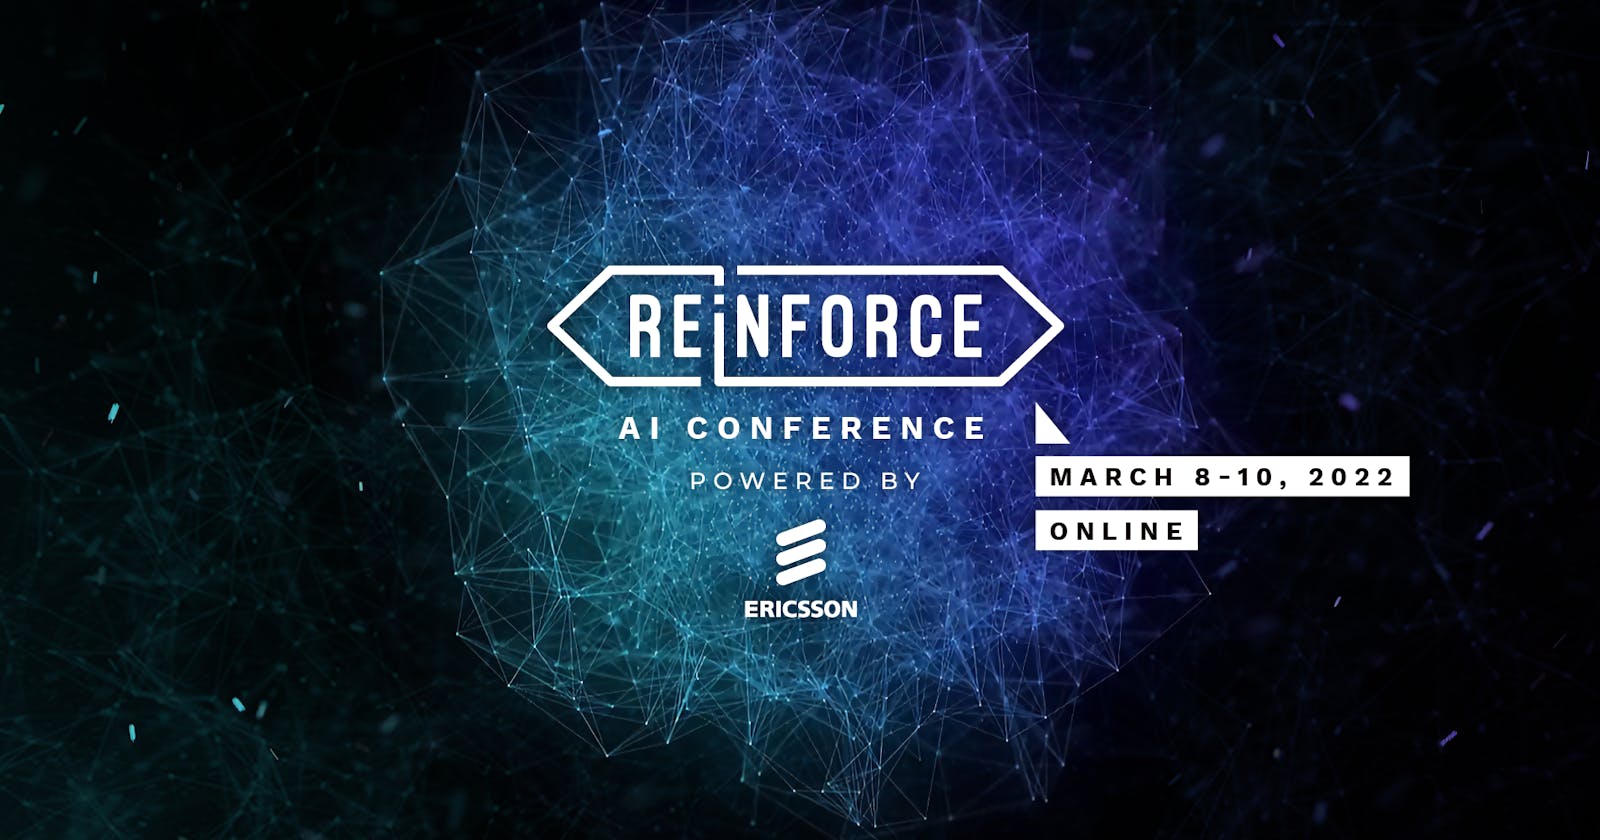 Would You Freak Out If You Could Talk To Dead People? - Miki Szeles's Report on Reinforce AI Conference